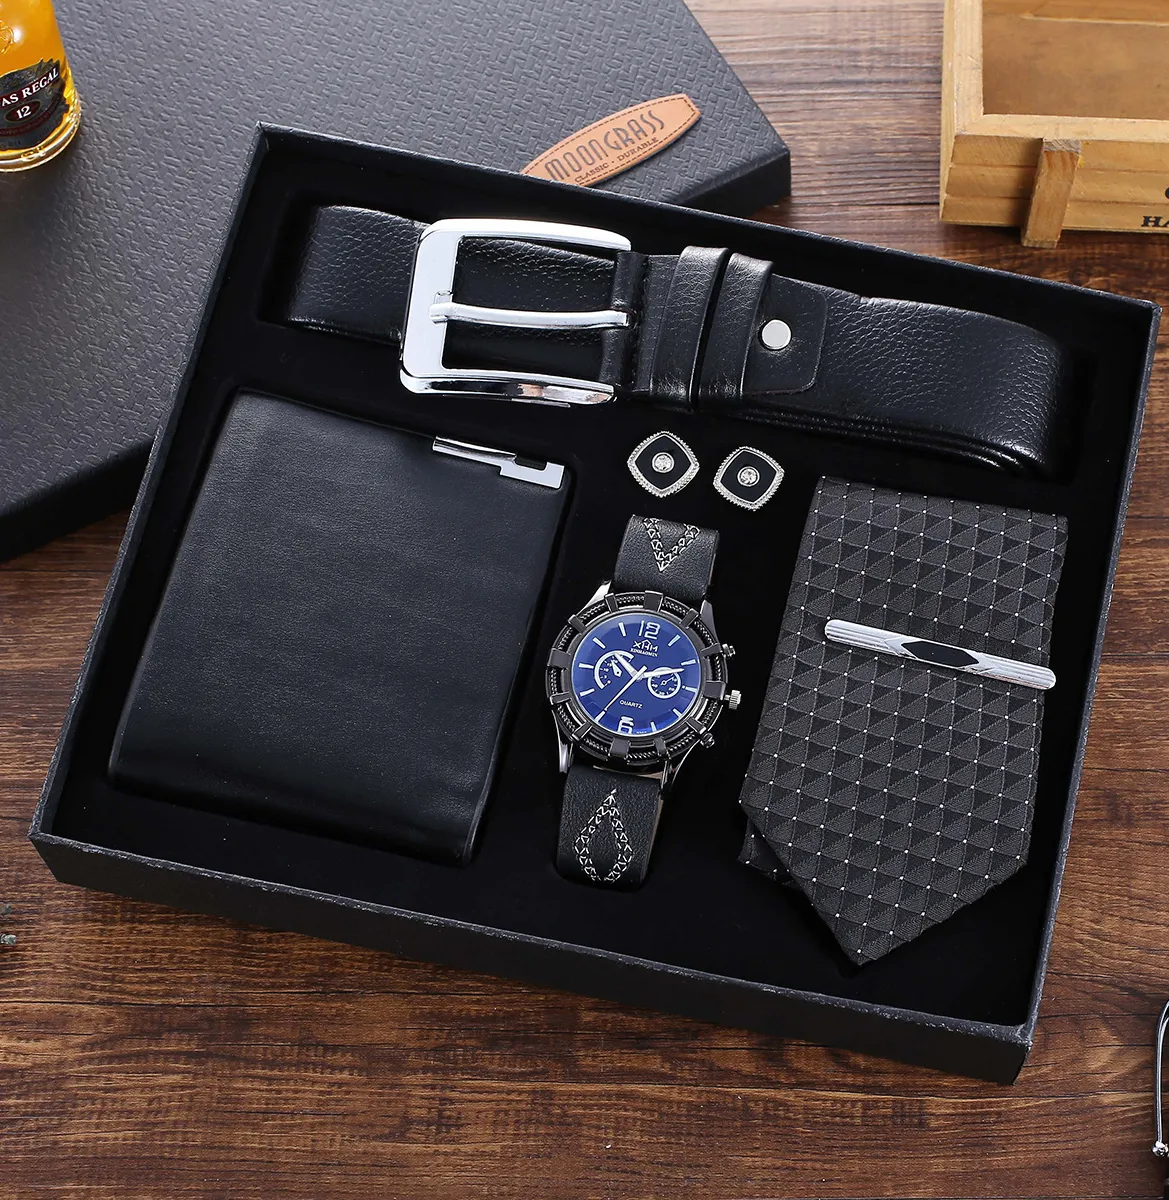 Hot sell 5Piece set Watch Belt Tie Glasses Wallet Business Creative Fashion Simple Combination Gift Sets